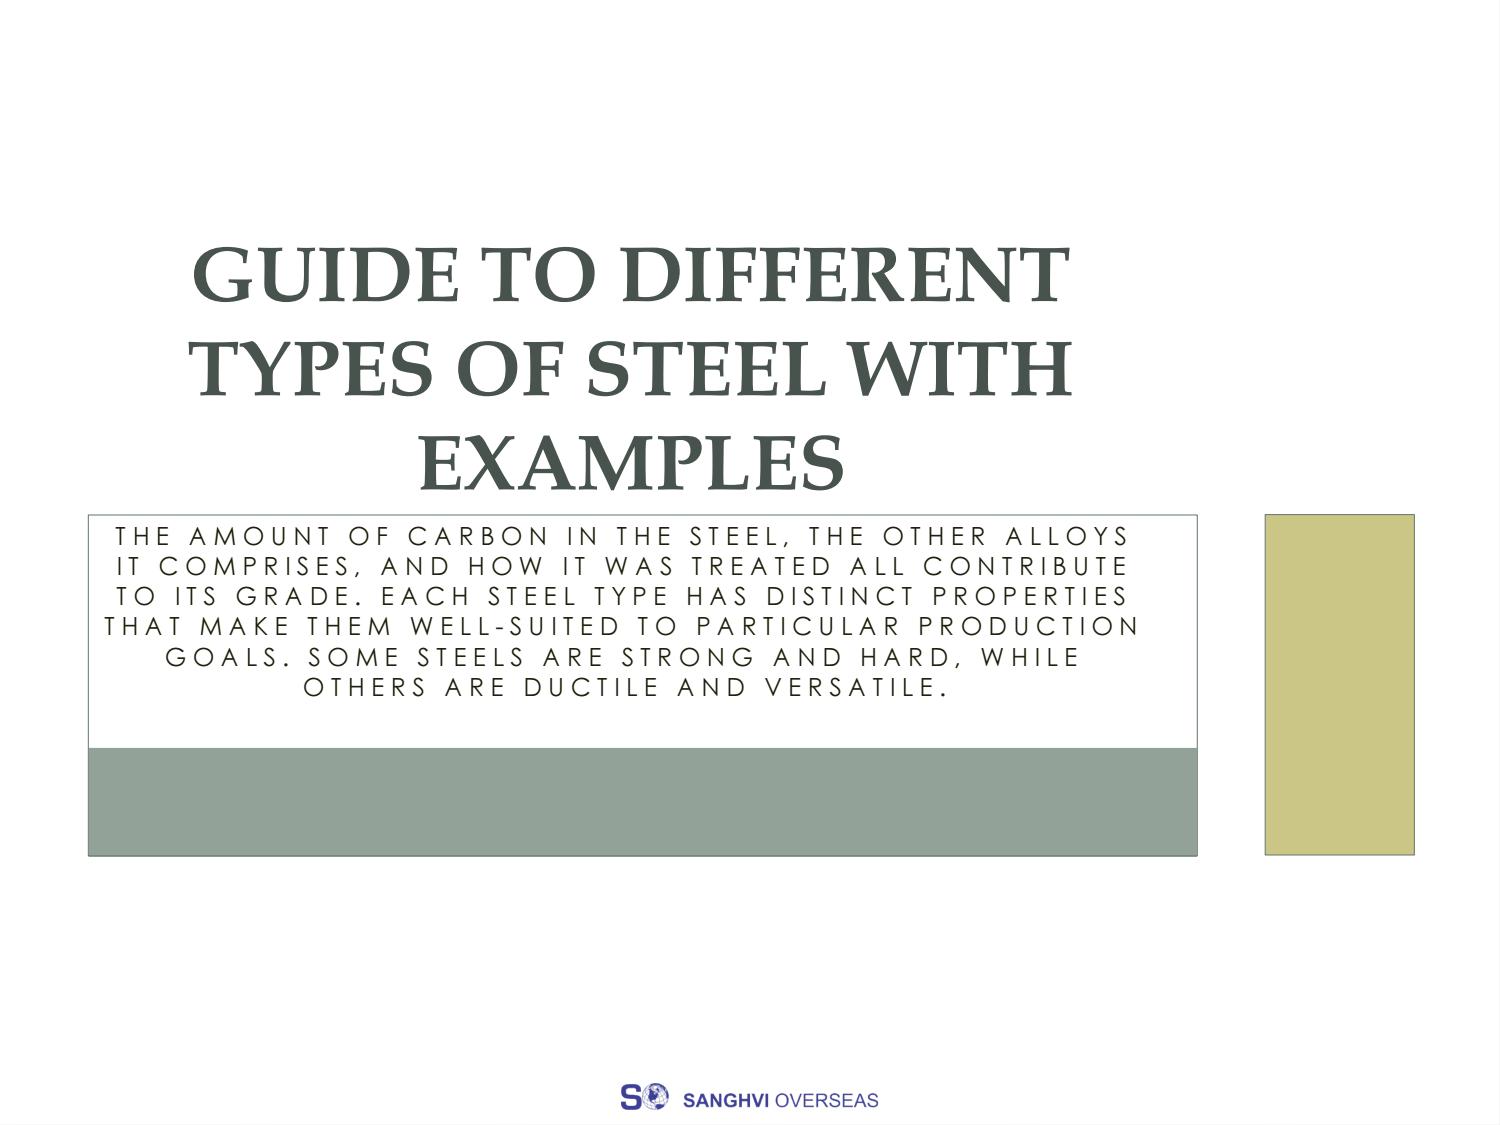 GUIDE TO DIFFERENT
TYPES OF STEEL WITH
EXAMPLES

THE AMOUNT OF CARBON IN THE STEEL, THE OTHER ALLOYS
IT COMPRISES, AND HOW IT WAS TREATED ALL CONTRIBUTE
TO ITS GRADE. EACH STEEL TYPE HAS DISTINCT PROPERTIES
THAT MAKE THEM WELL-SUITED TO PARTICULAR PRODUCTION
GOALS. SOME STEELS ARE STRONG AND HARD, WHILE
OTHERS ARE DUCTILE AND VERSATILE.

 

  

S® SANGHVI OVERSEAS